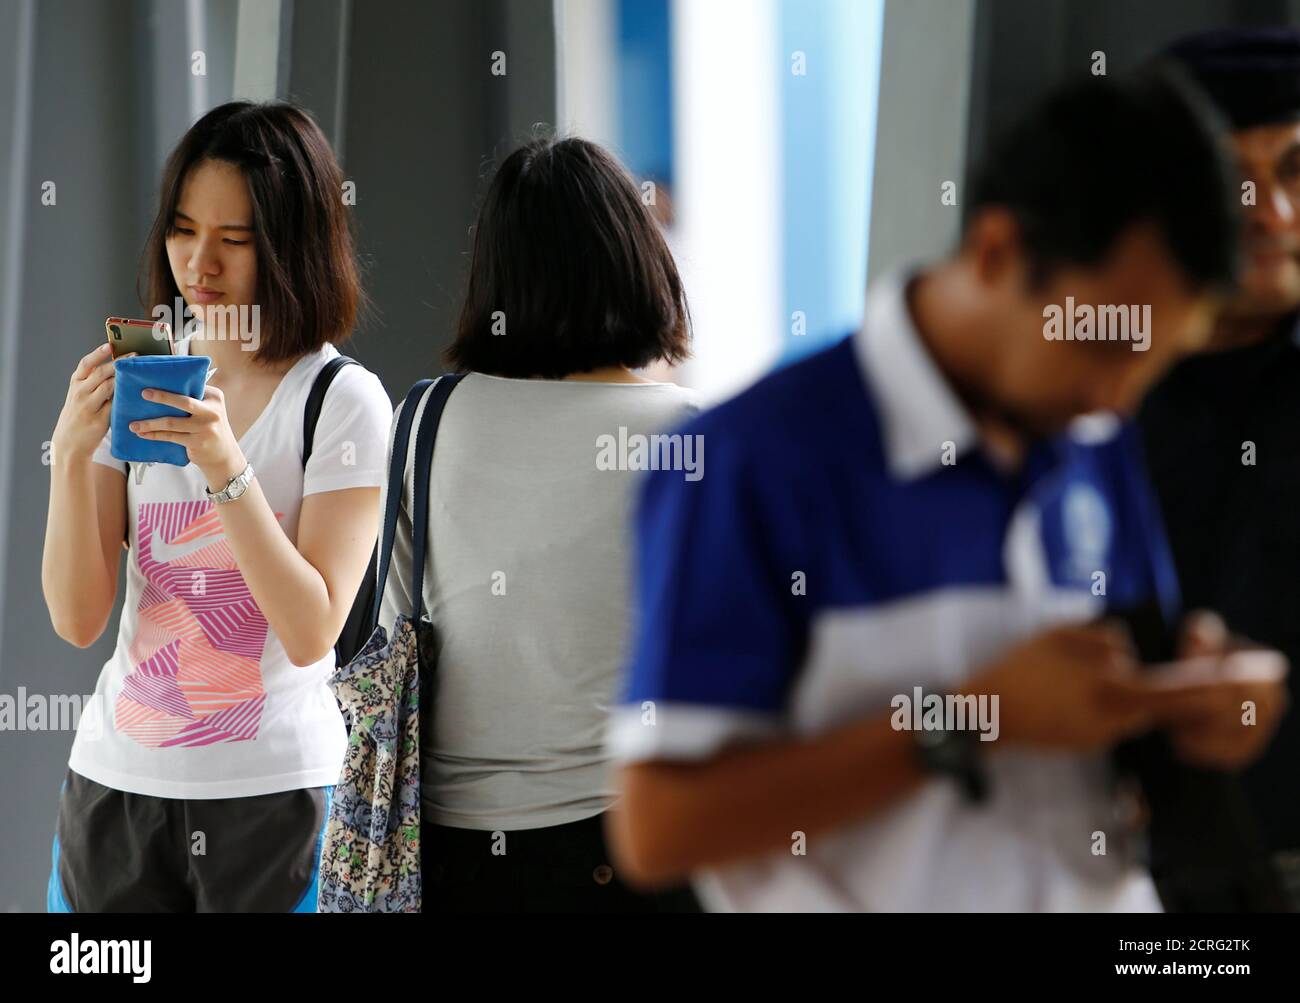 A student uses her mobile phone at an university in Semenyih, outside Kuala Lumpur, Malaysia November 3, 2017. REUTERS/Lai Seng Sin Stock Photo